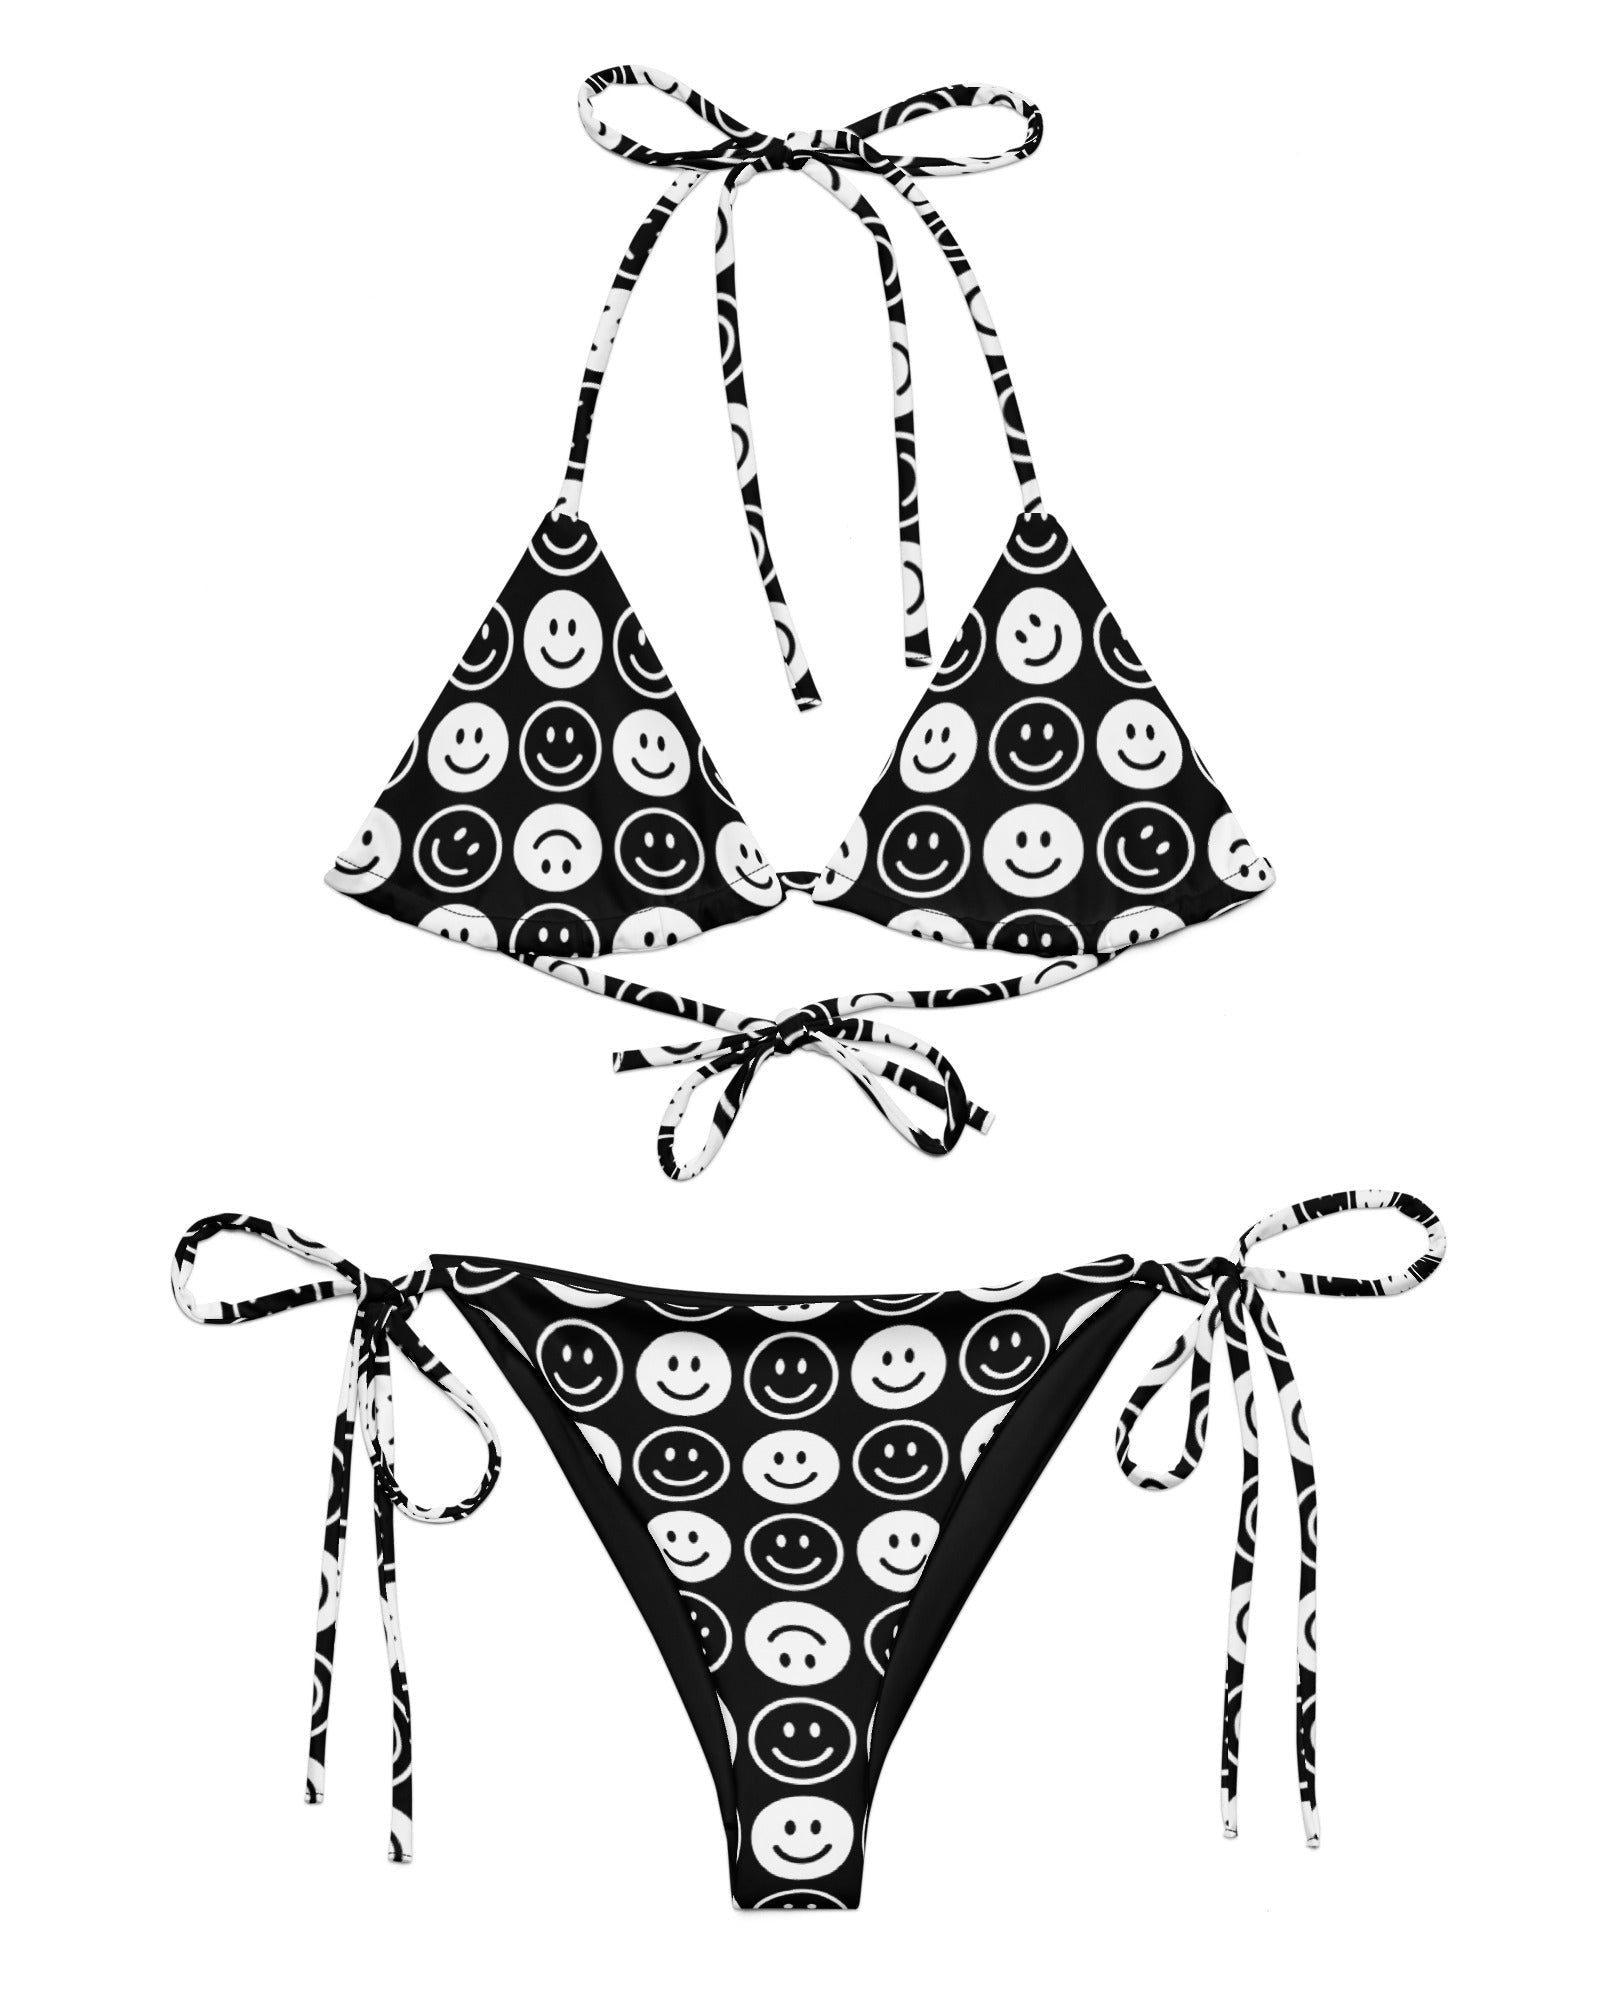 The All Smiles String Bottoms & the All Smiles Recycled Triangle Top by One Stop Rave on a white background.